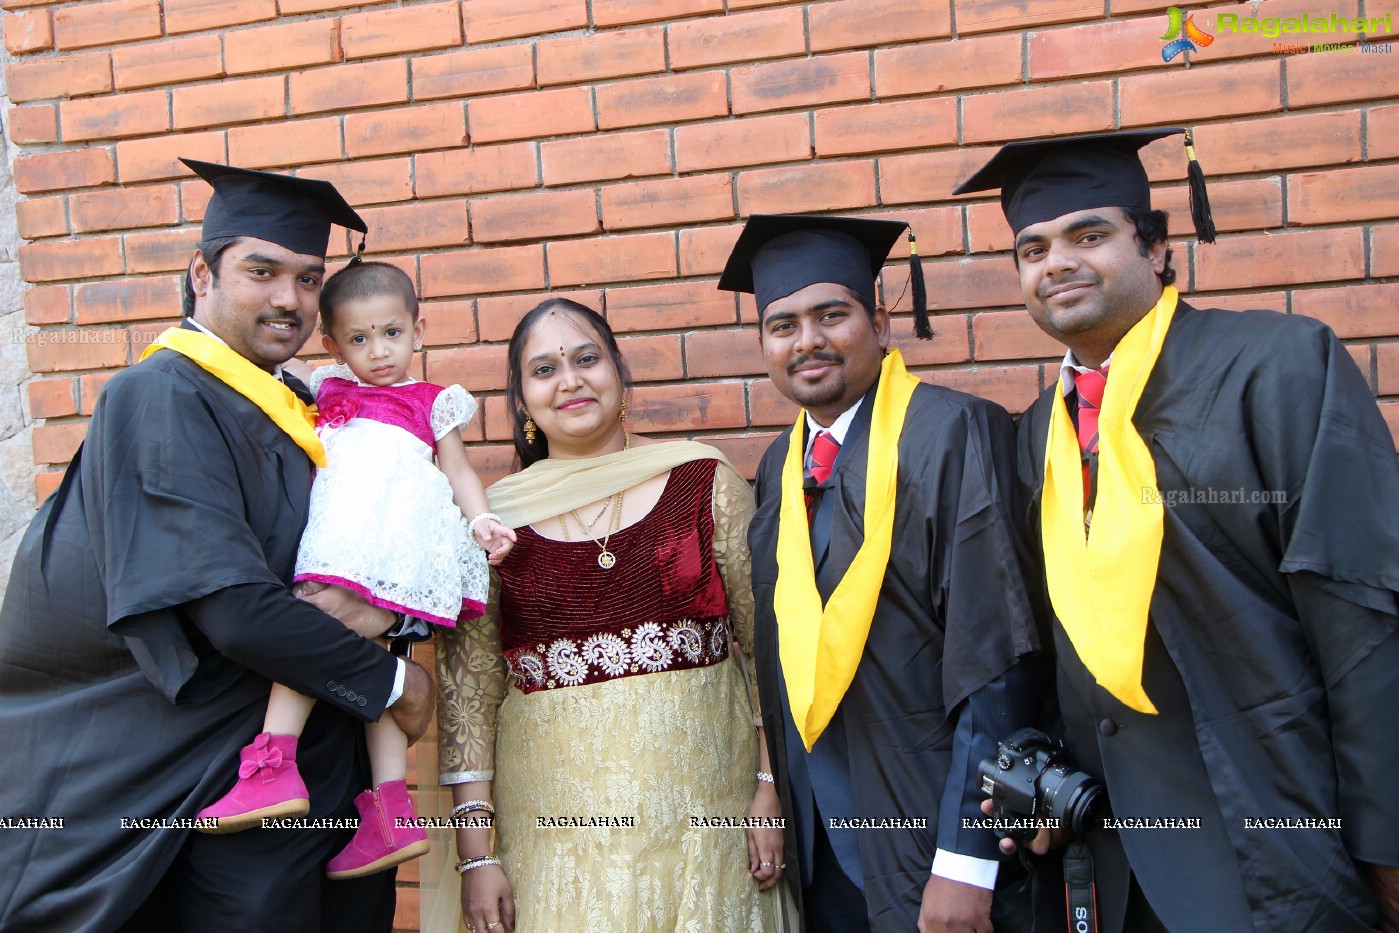 Institute of Management Technology Hyderabad Convocation 2015